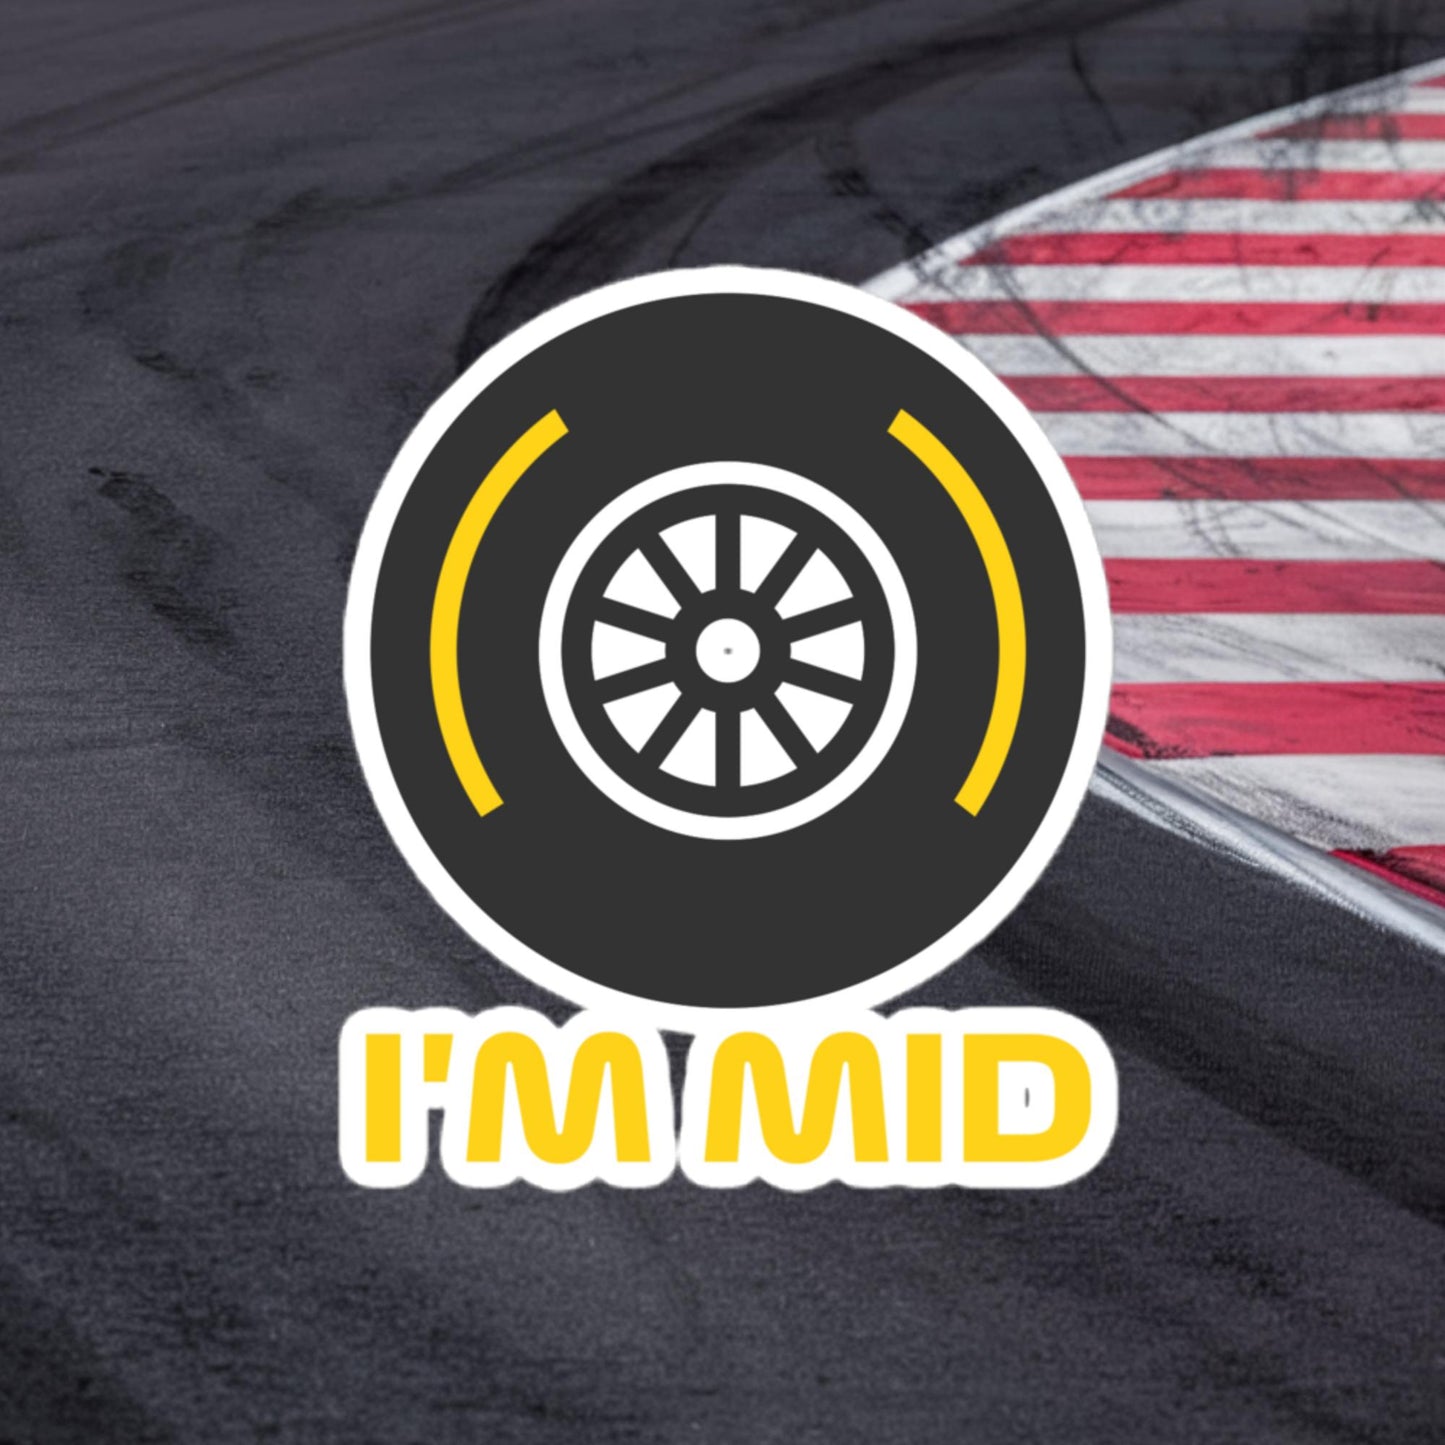 I'm Mid Tyres Funny F1 Bubble-free stickers Next Cult Brand